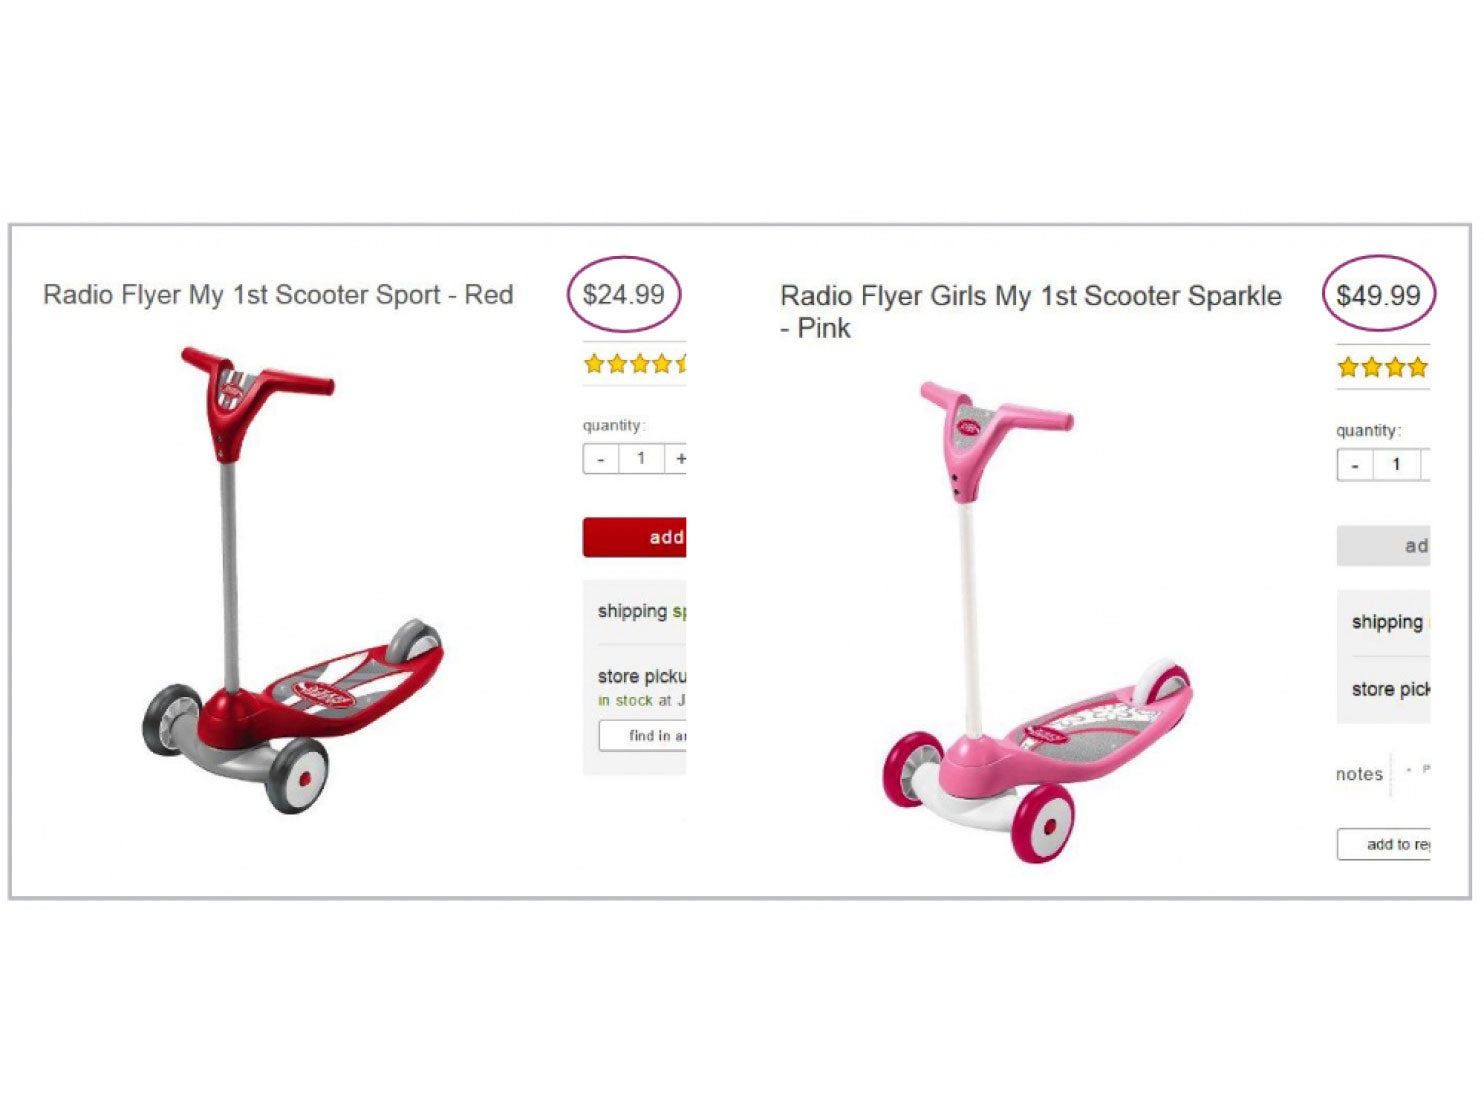 Target listed one scooter for $24.99 and the other for $49.99